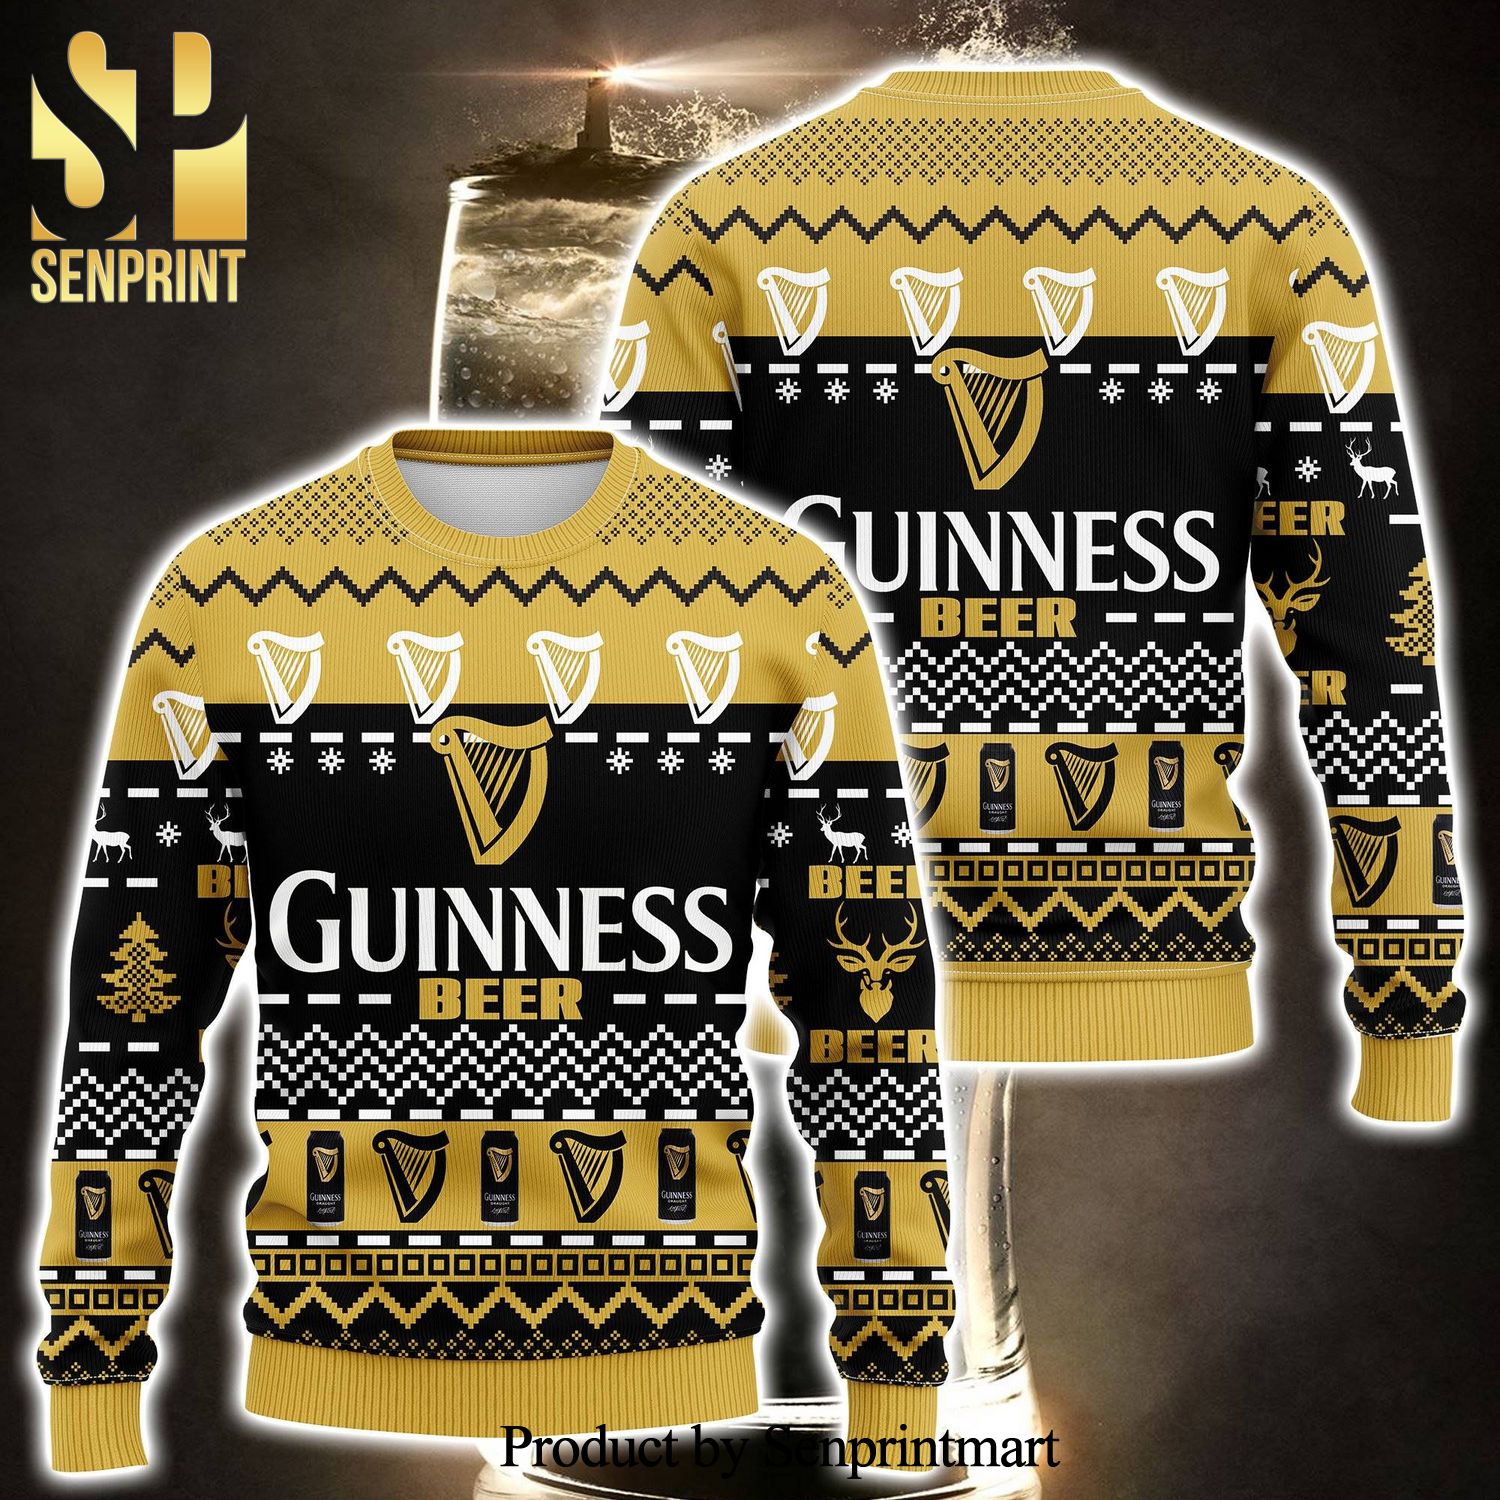 Geinness Beer Knitted Ugly Christmas Sweater